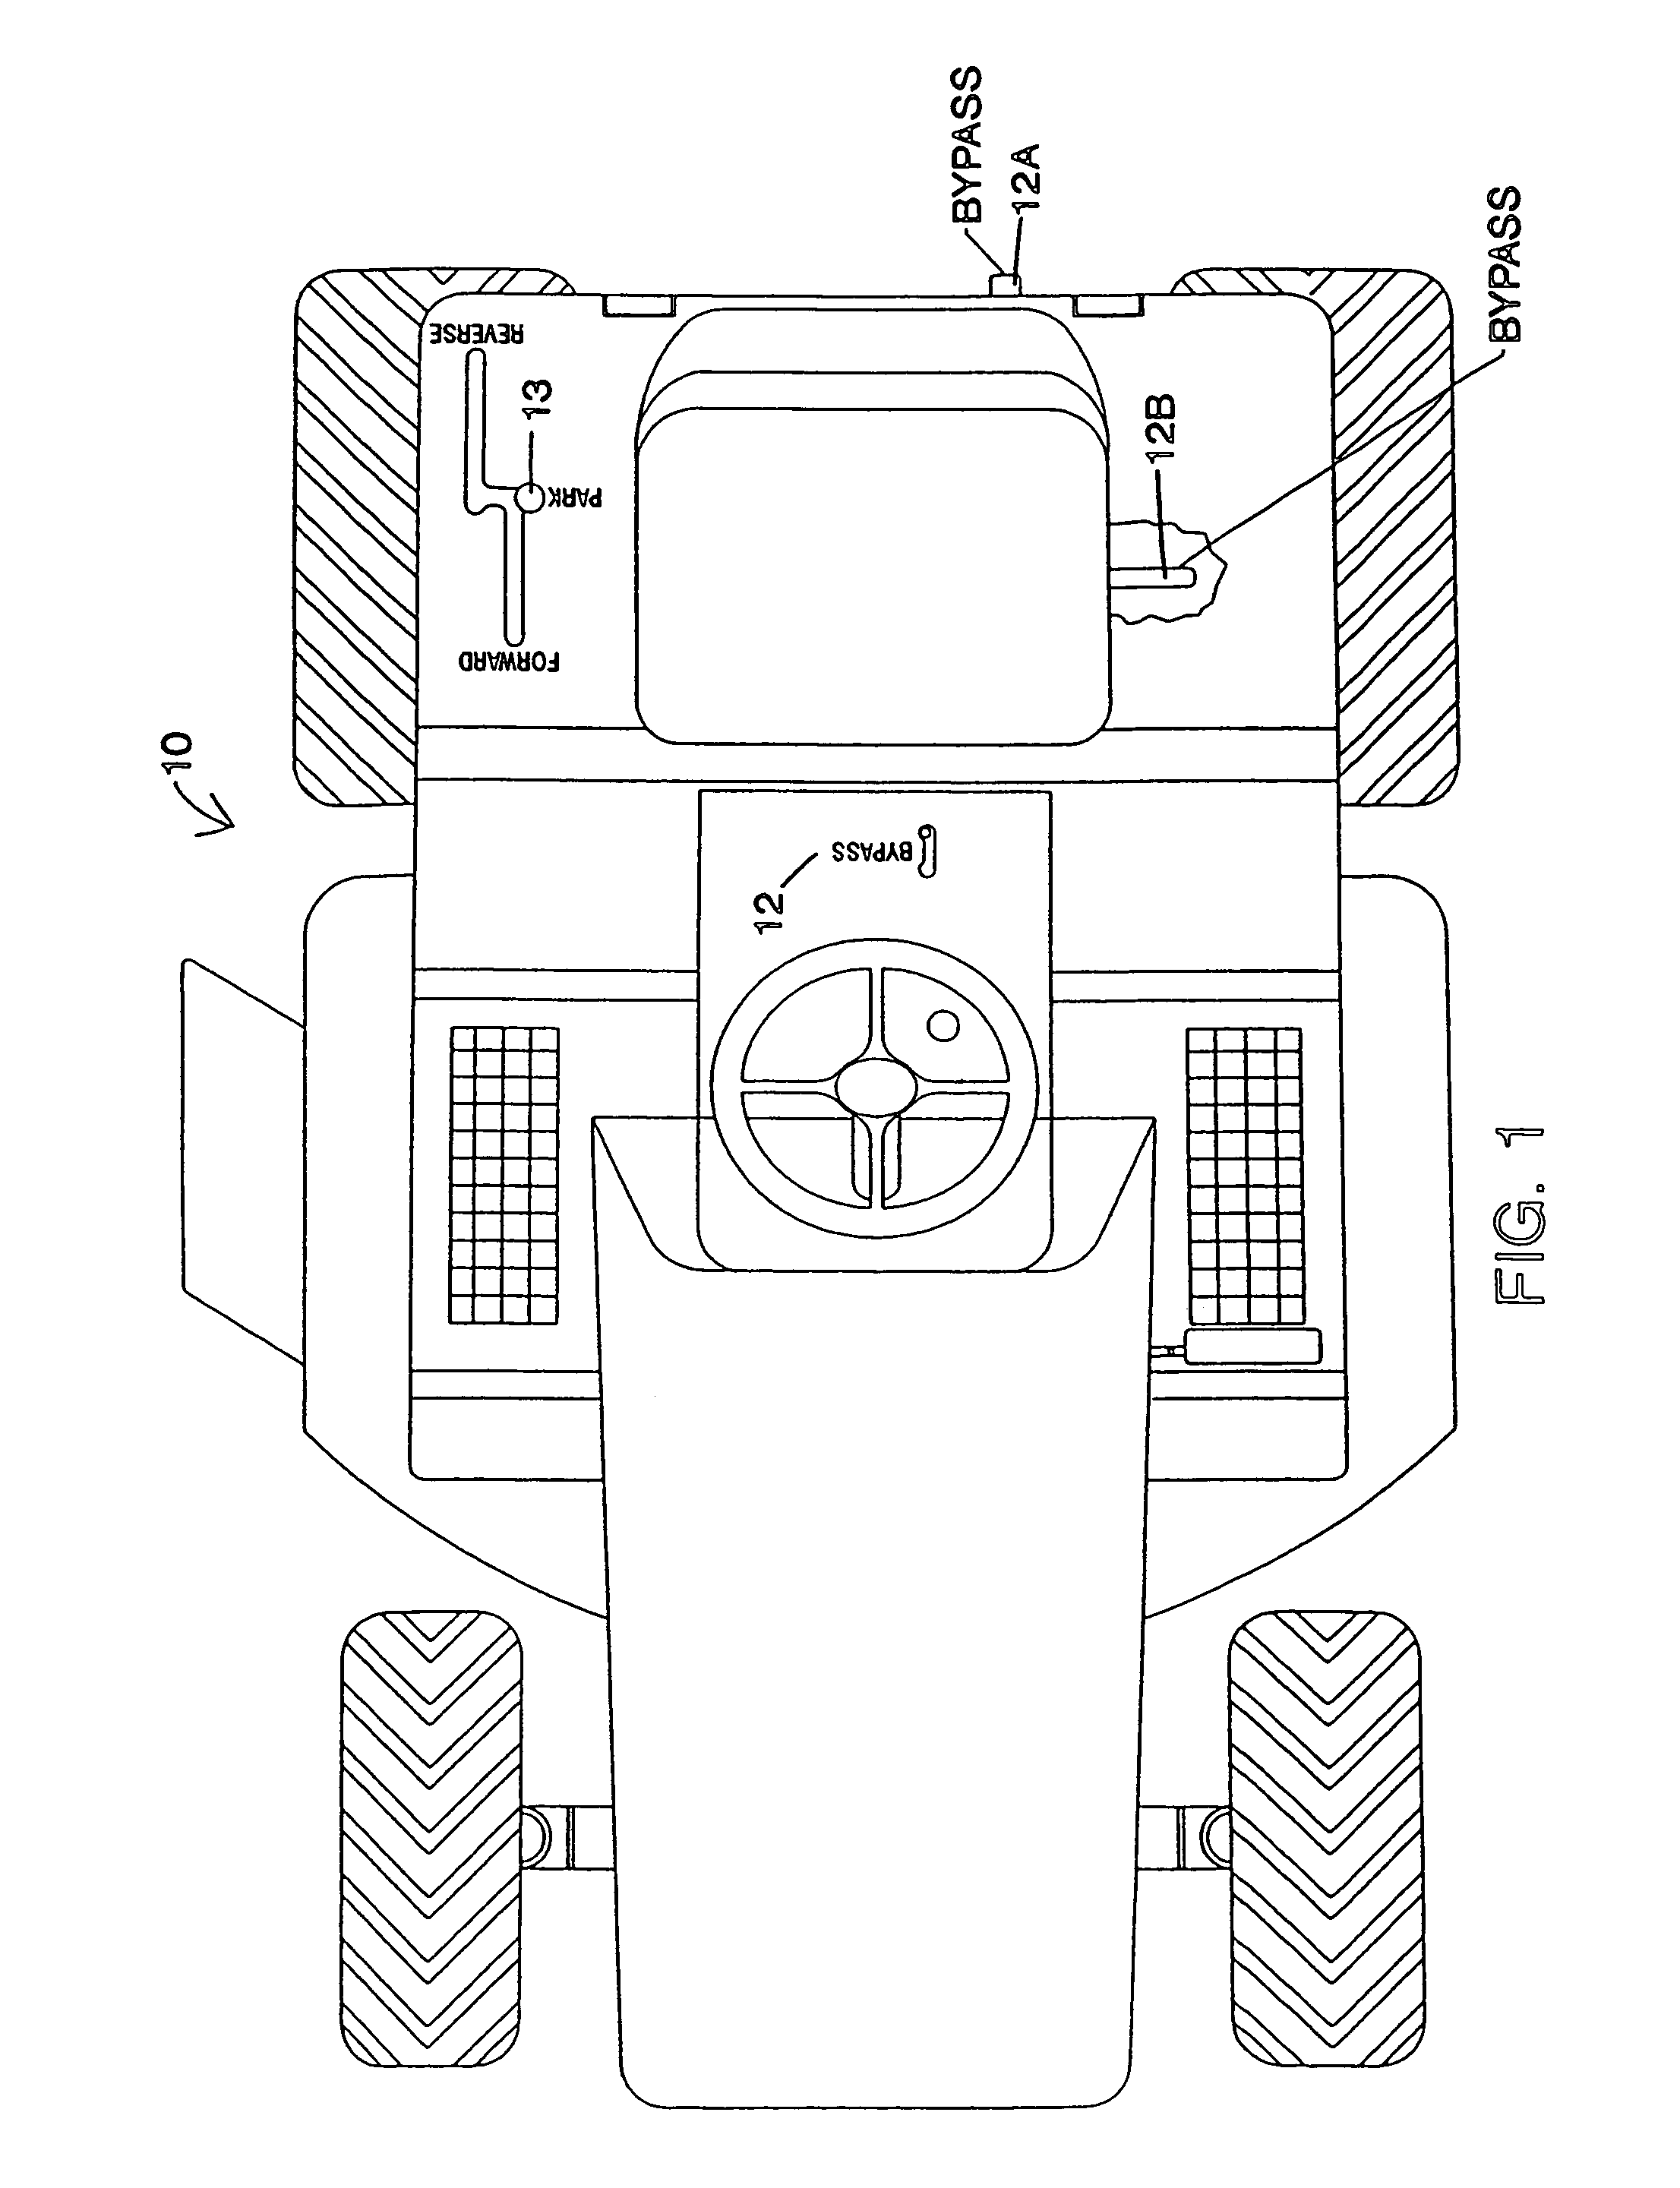 Bypass for a hydraulic device